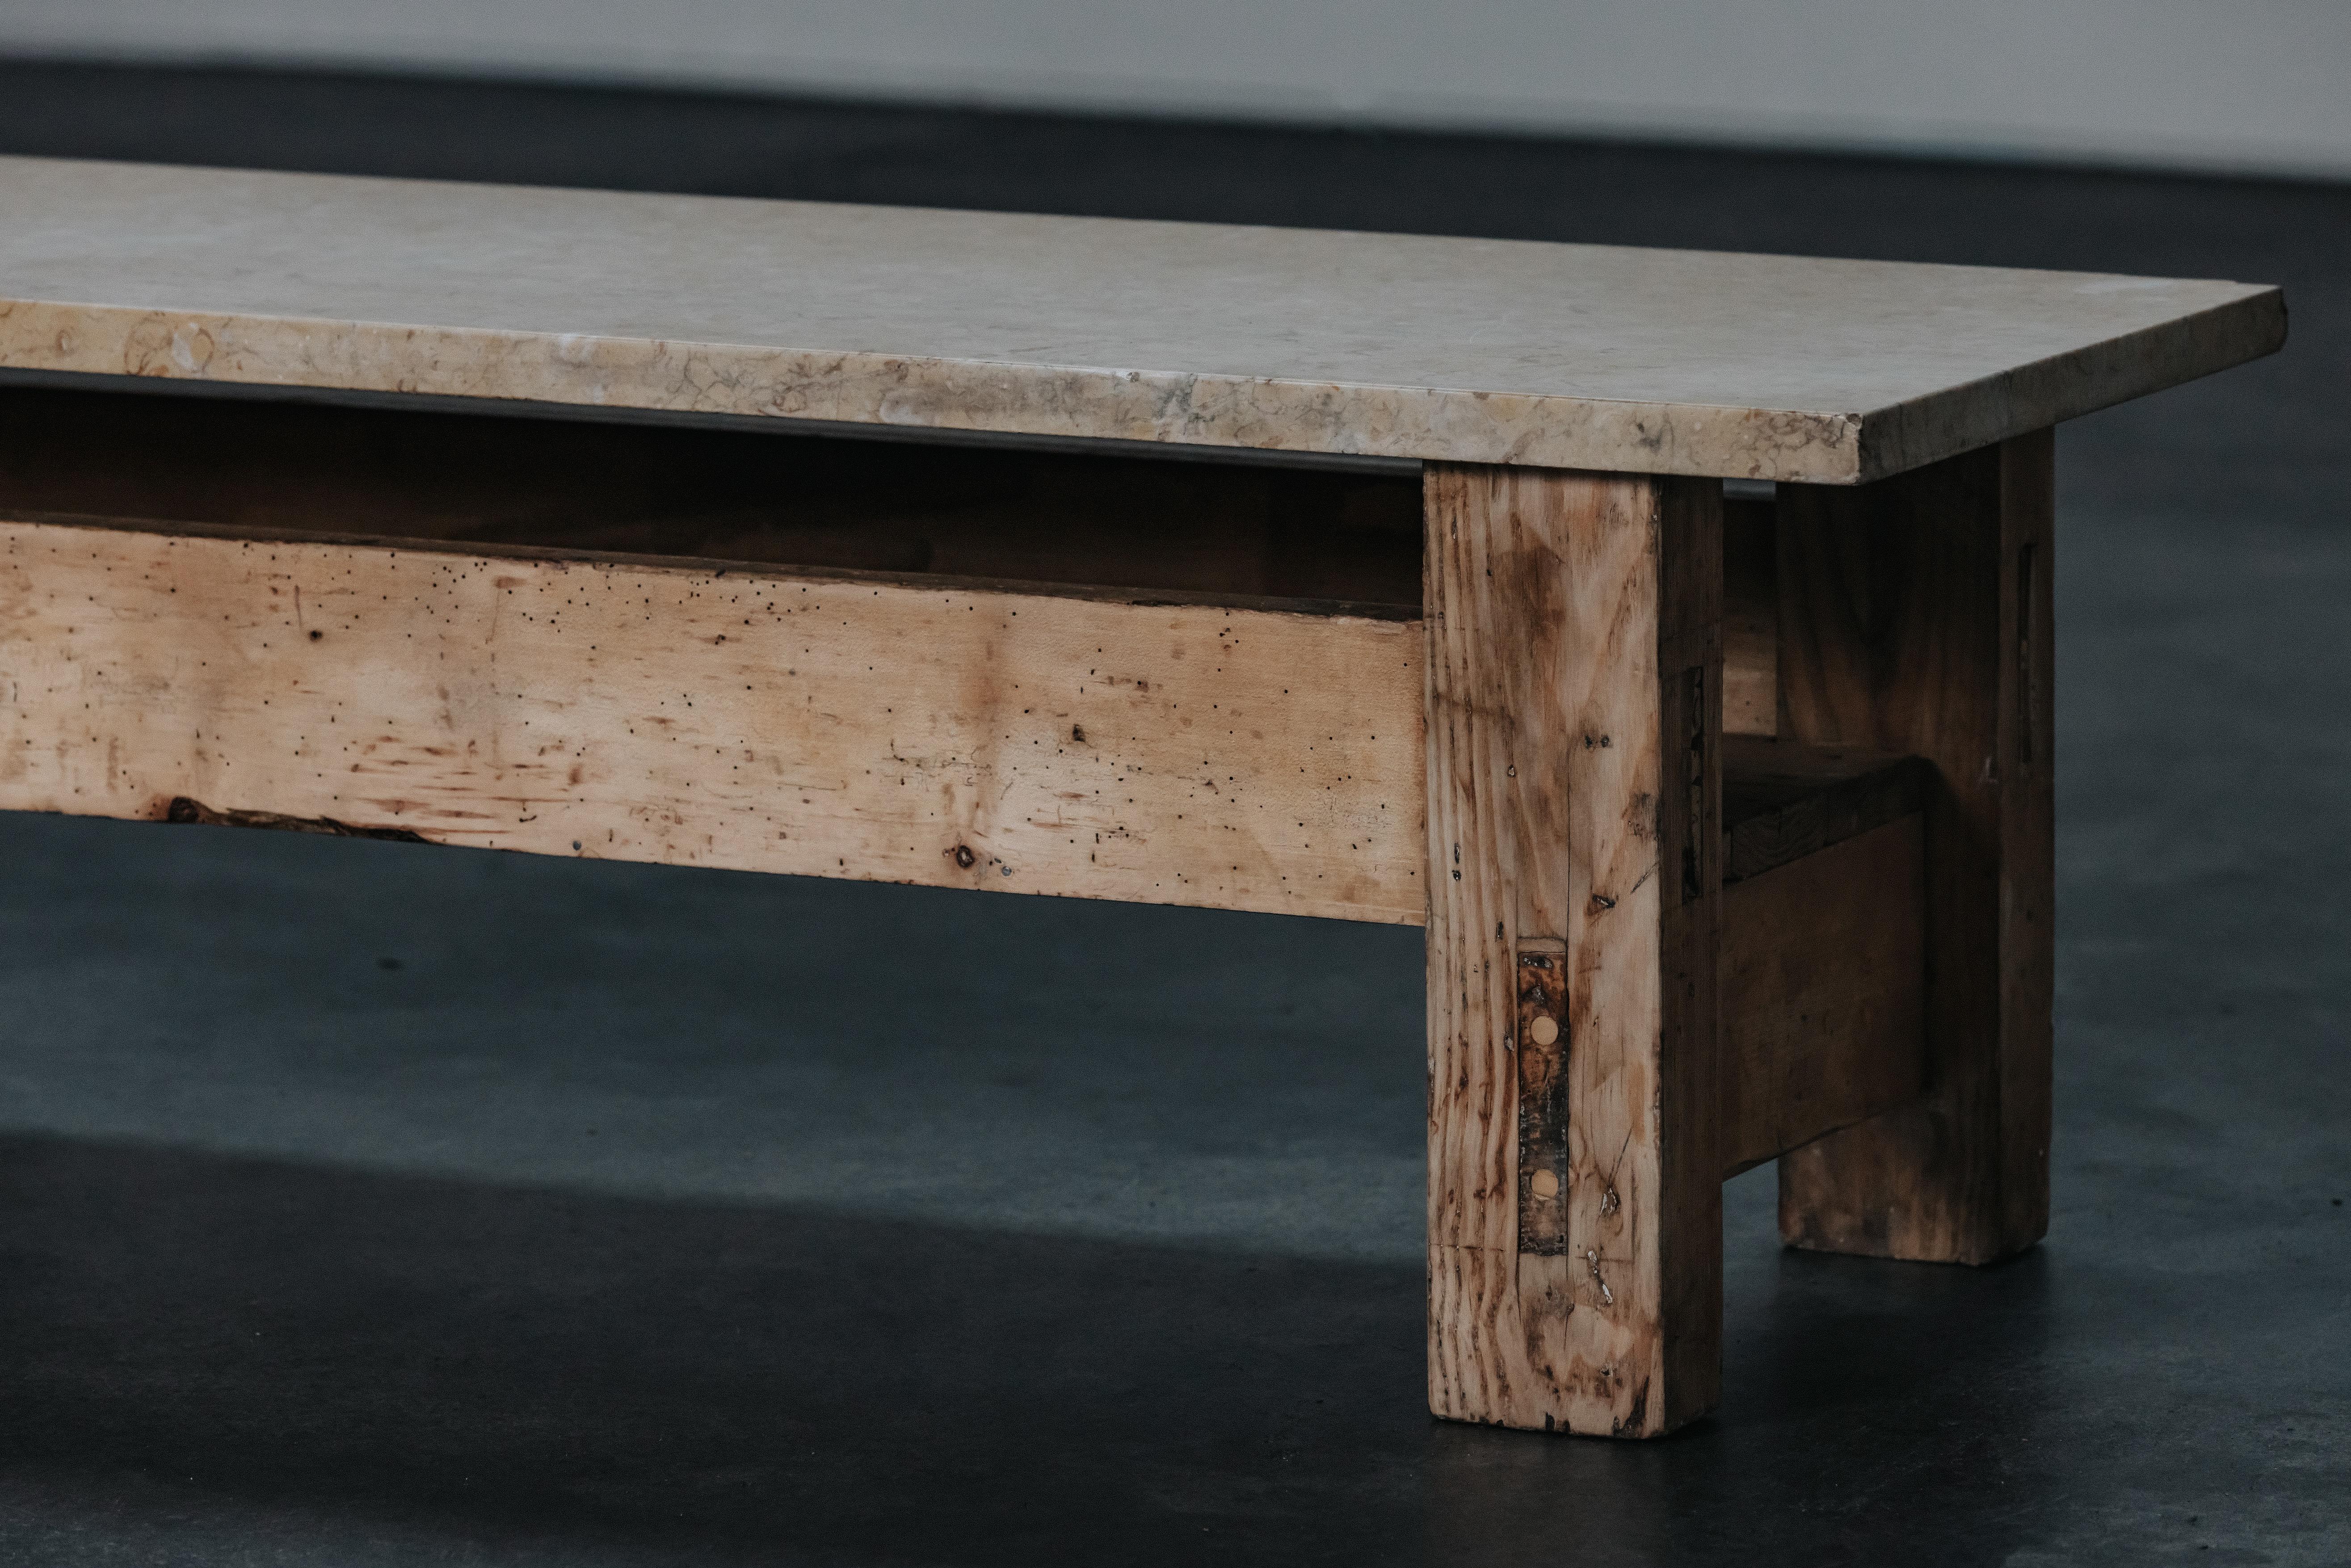 European Vintage Oak And Marble Coffee Table From France, Circa 1970s For Sale